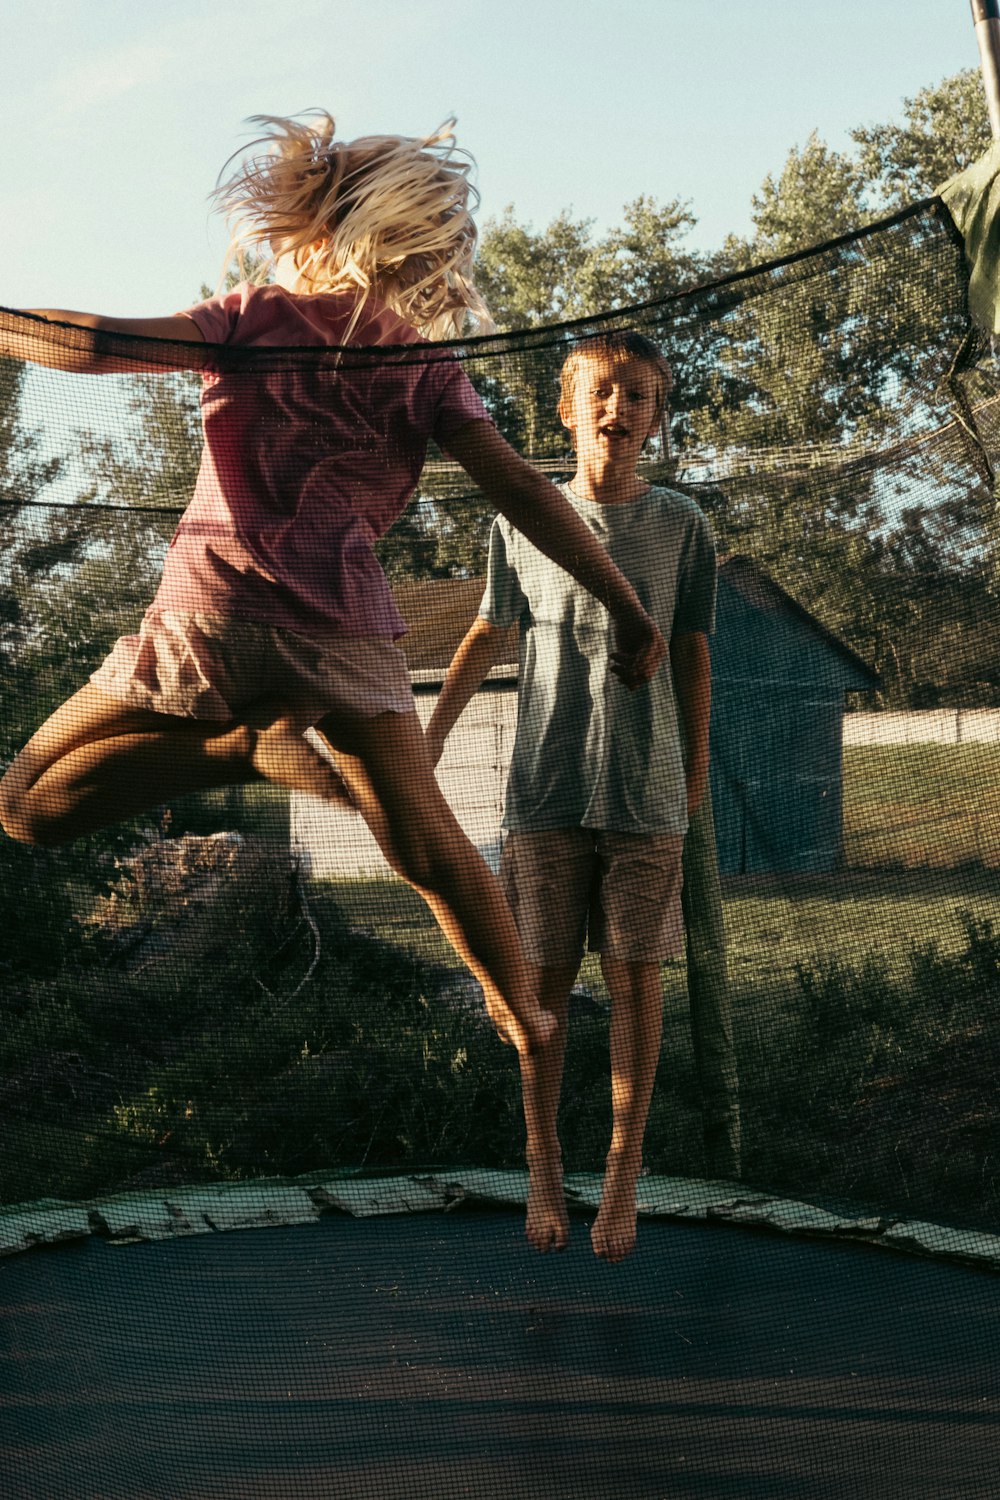 a young girl jumping on a trampoline while a man watches